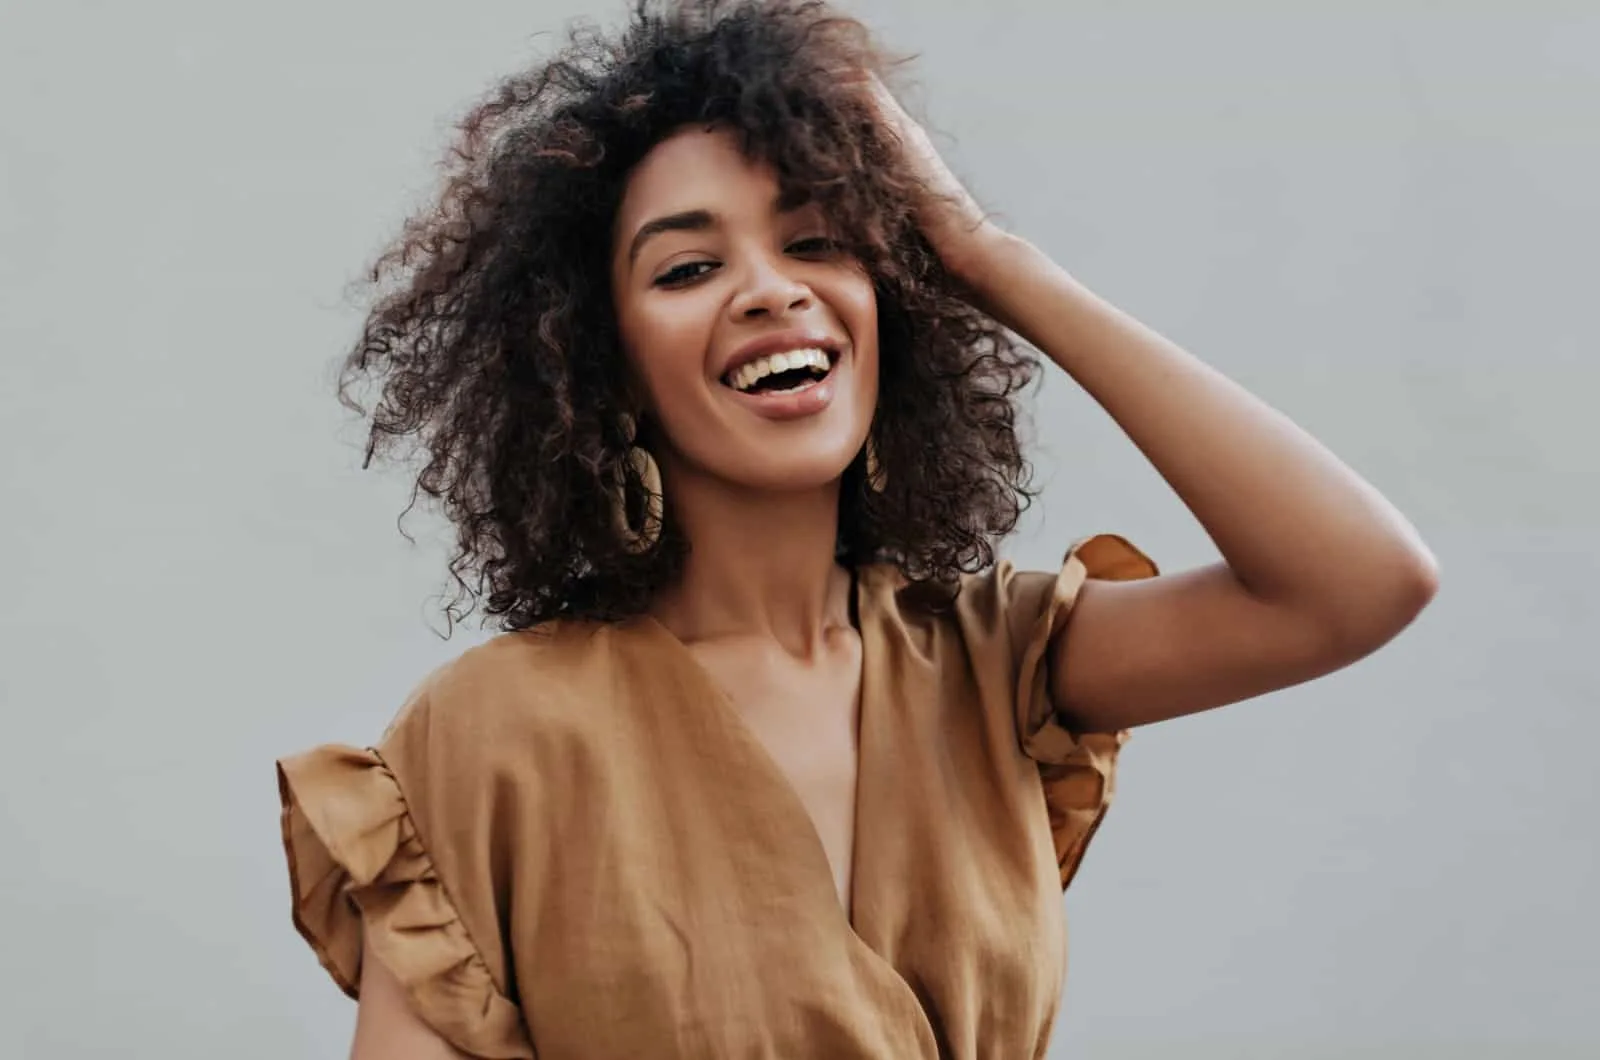 beautiful curly haired woman smiles and poses for camera